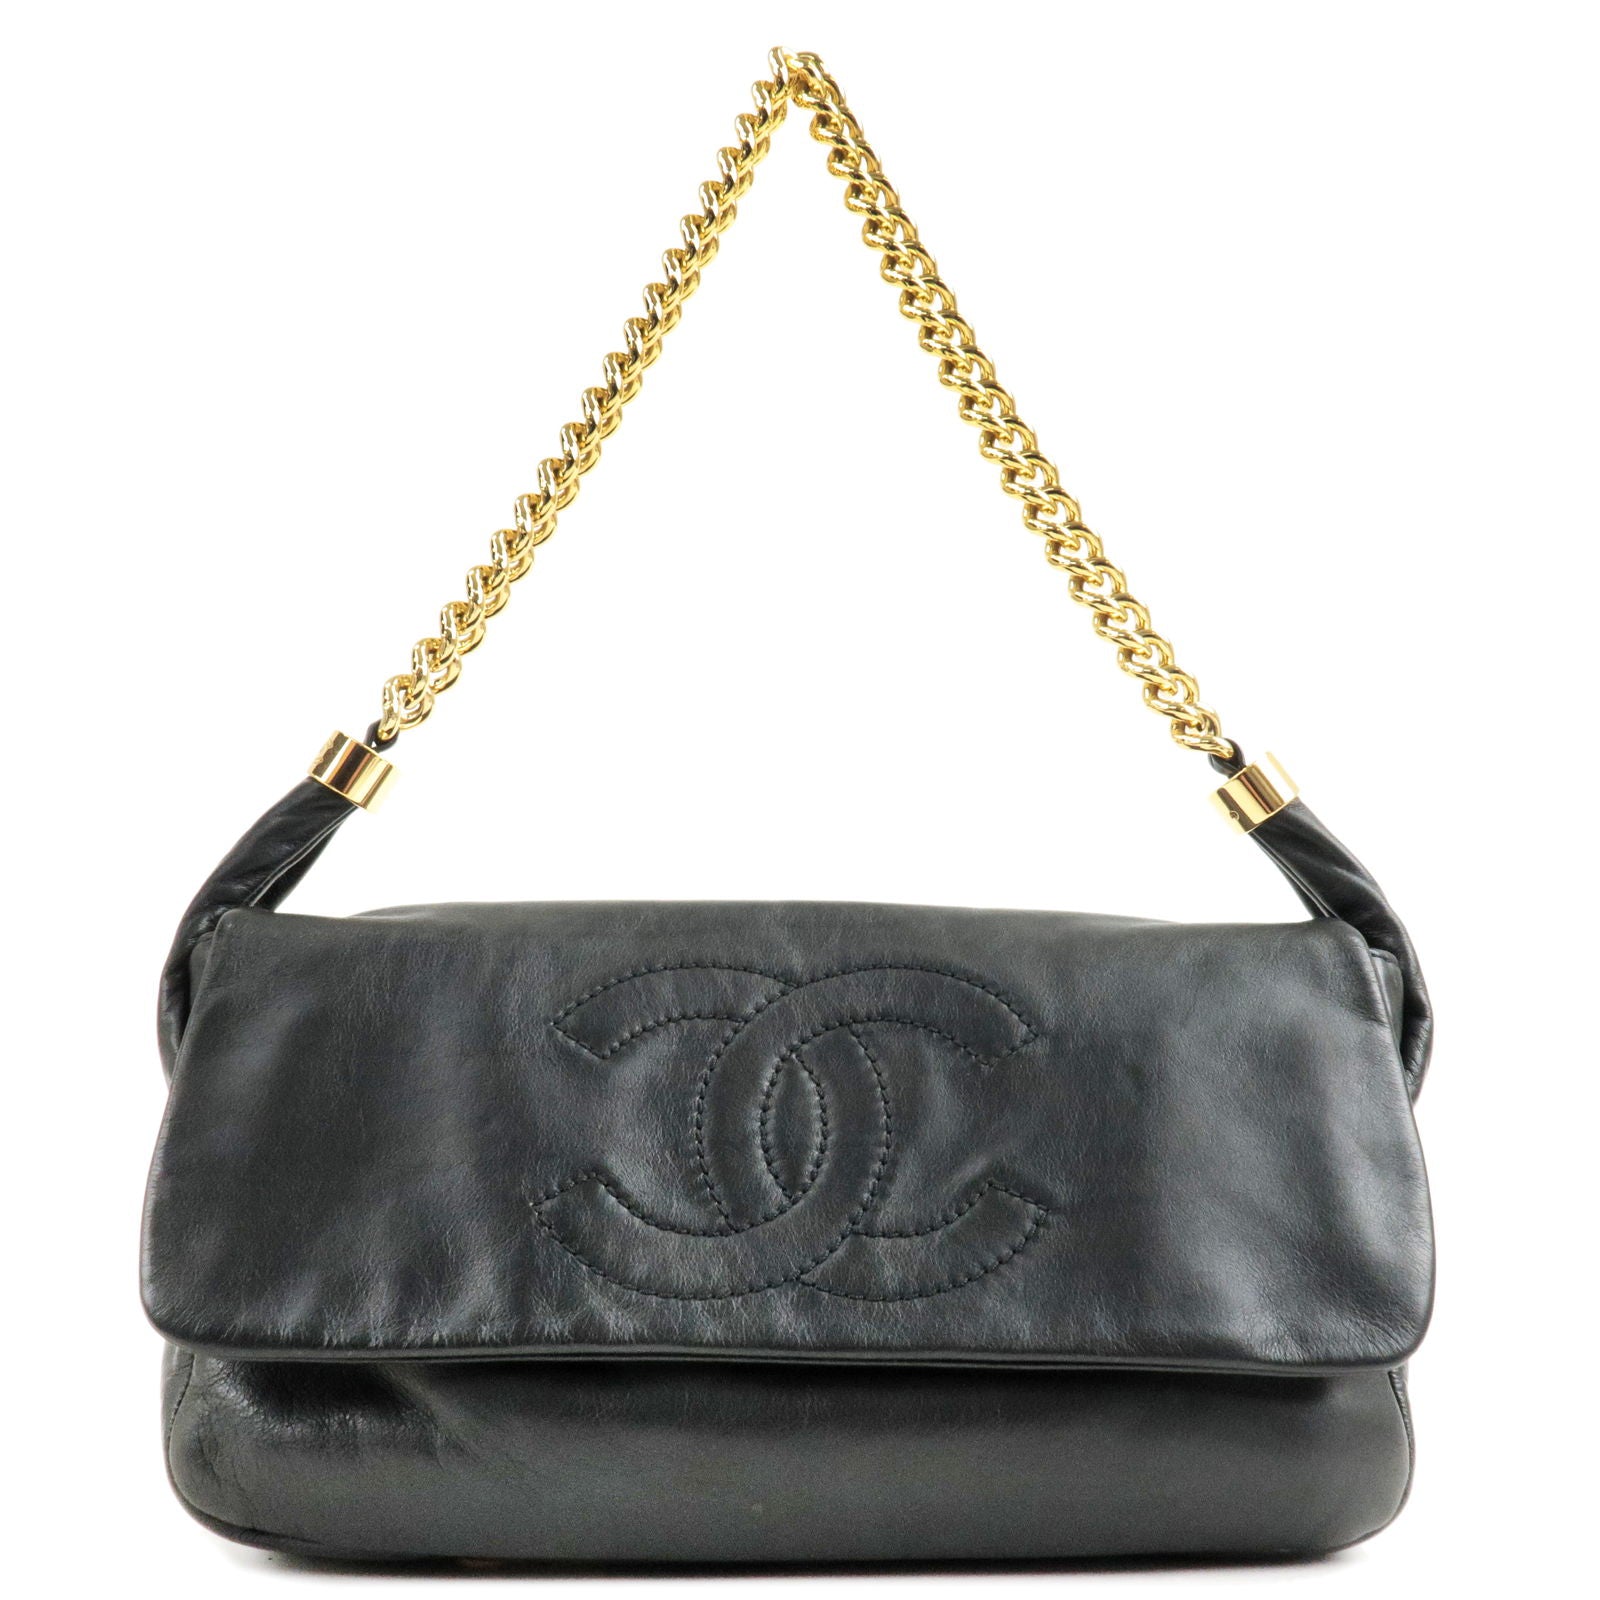 Gold - CHANEL - Mark - Artcurial 2639 2014-11 Chanel - Shoulder - Chain -  COCO - Unintelligible - ep_vintage luxury Store - Leather - Hardware – dct  - Bag